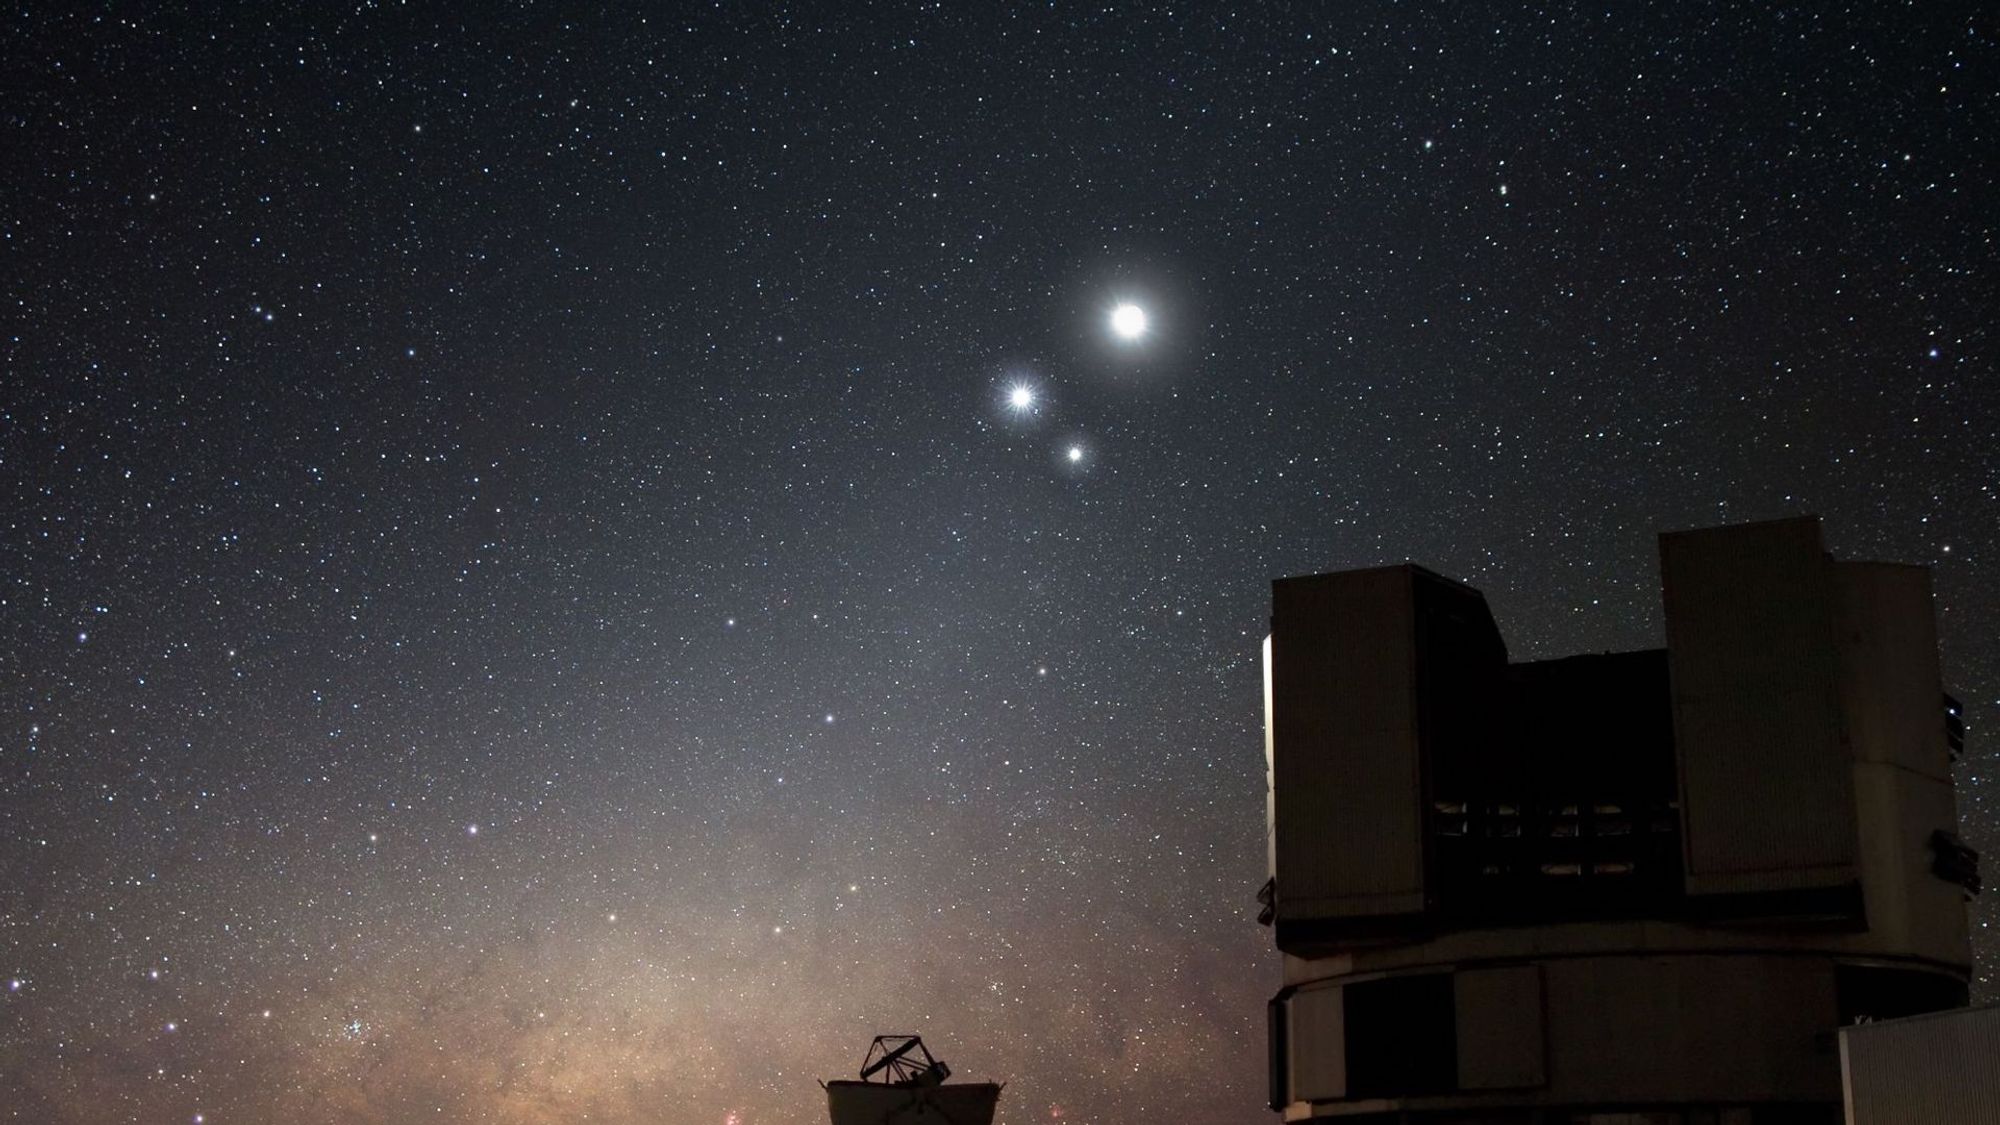 A conjunction of planets over the European Southern Observatory’s Very Large Telescope.